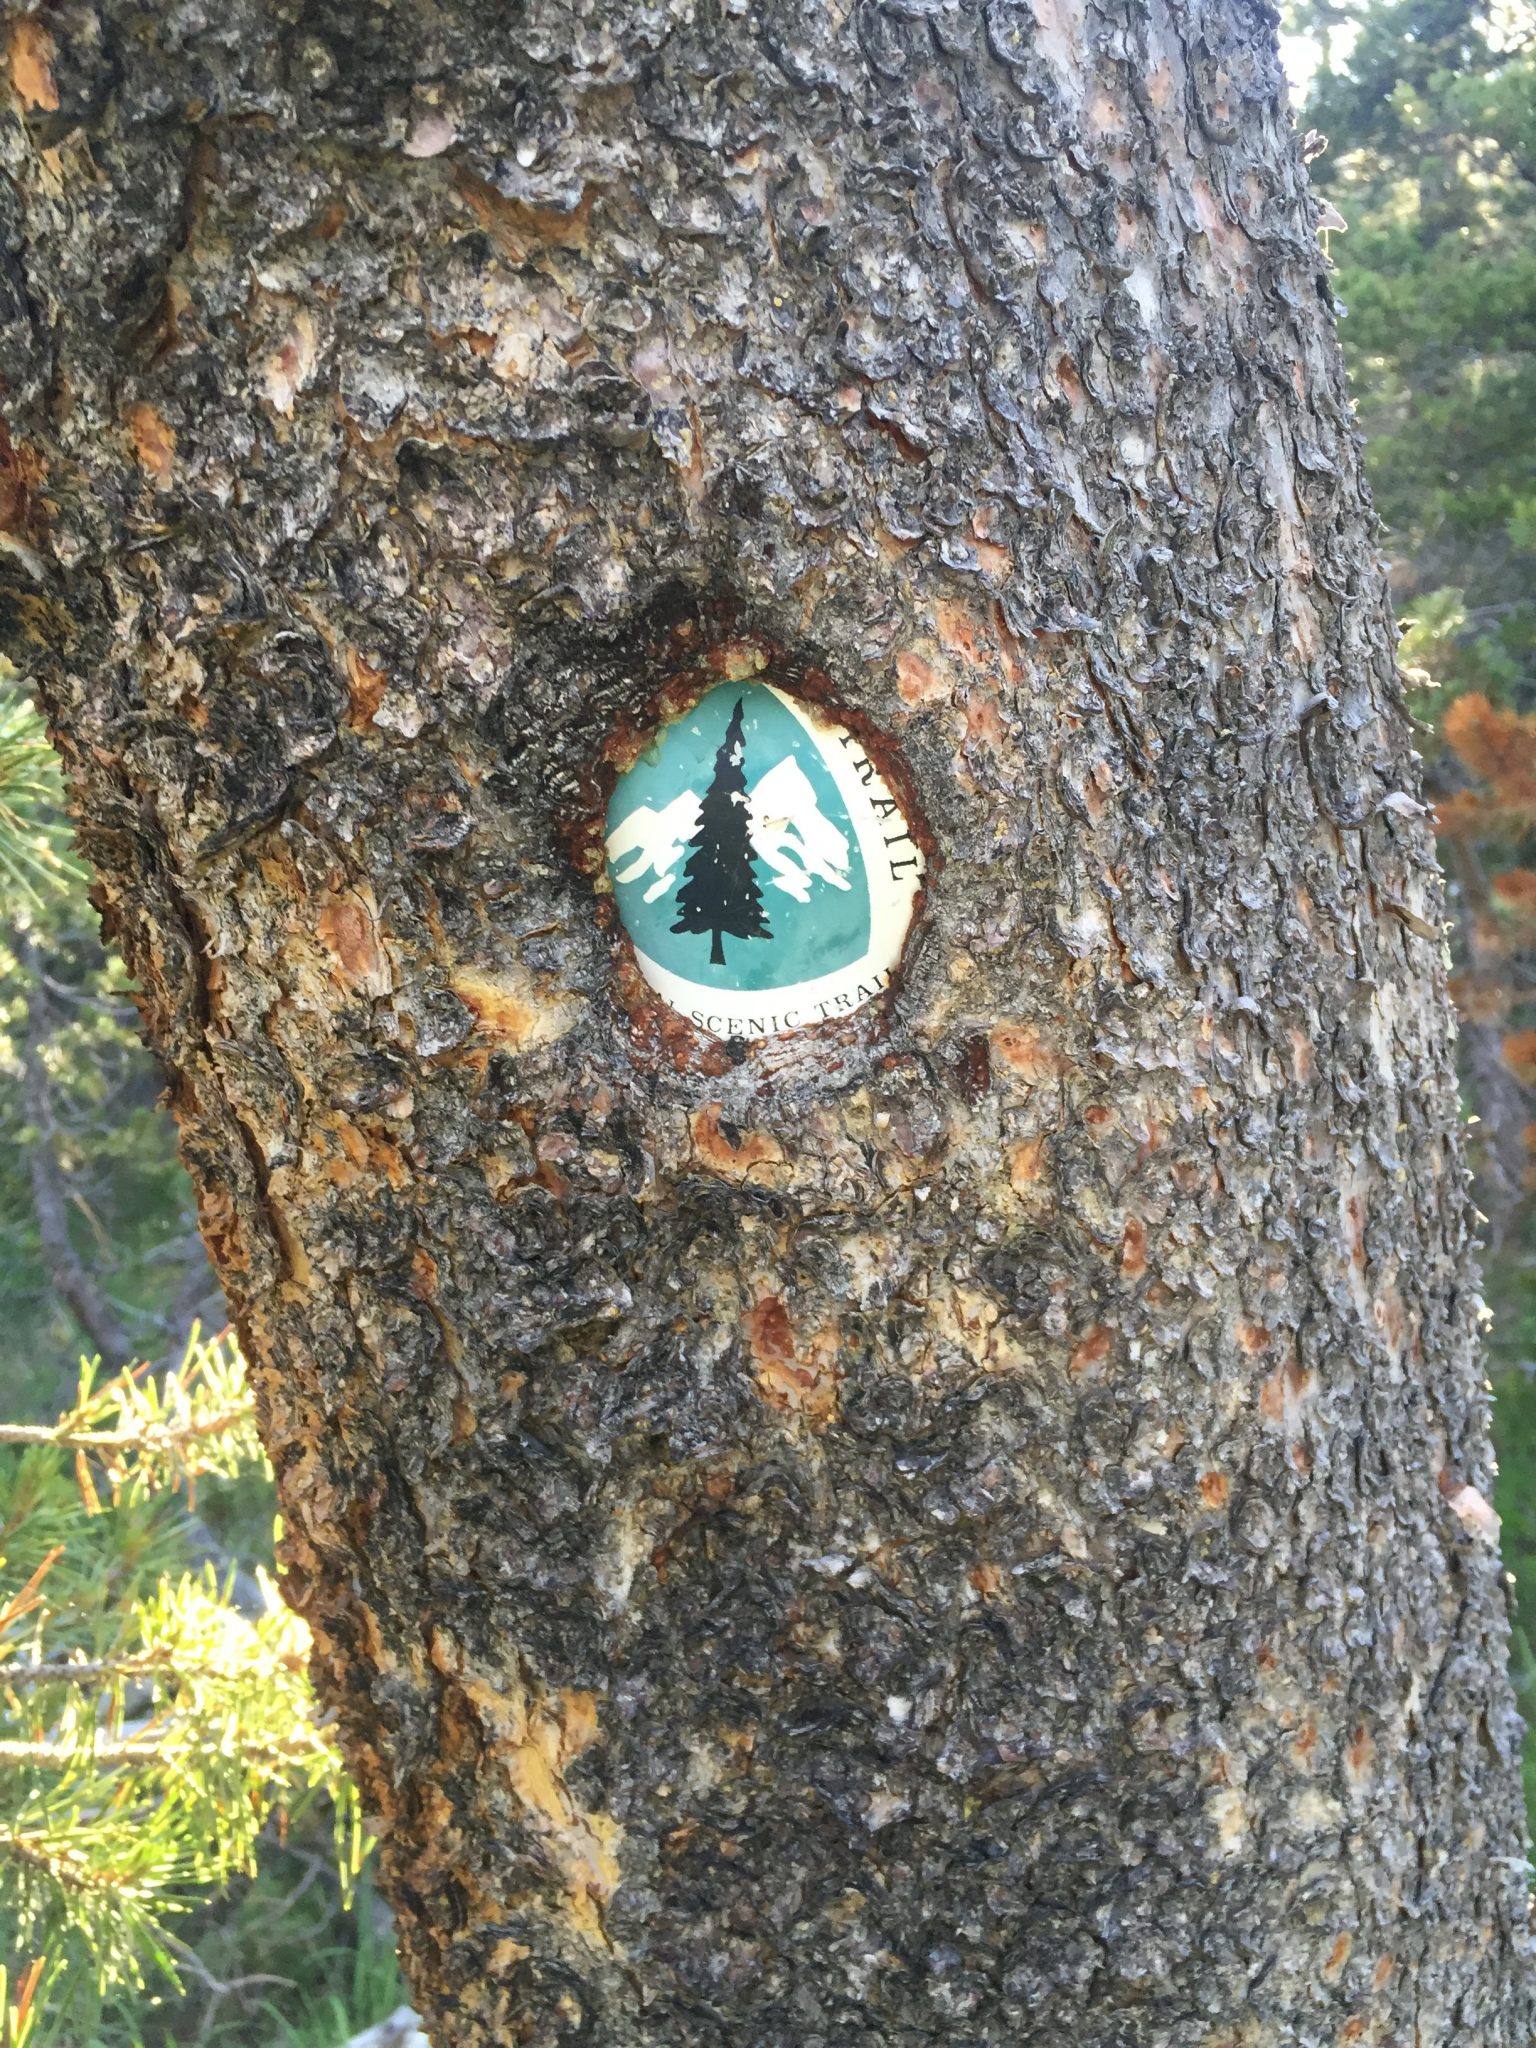 PCT trail marker partially swallowed by tree bark